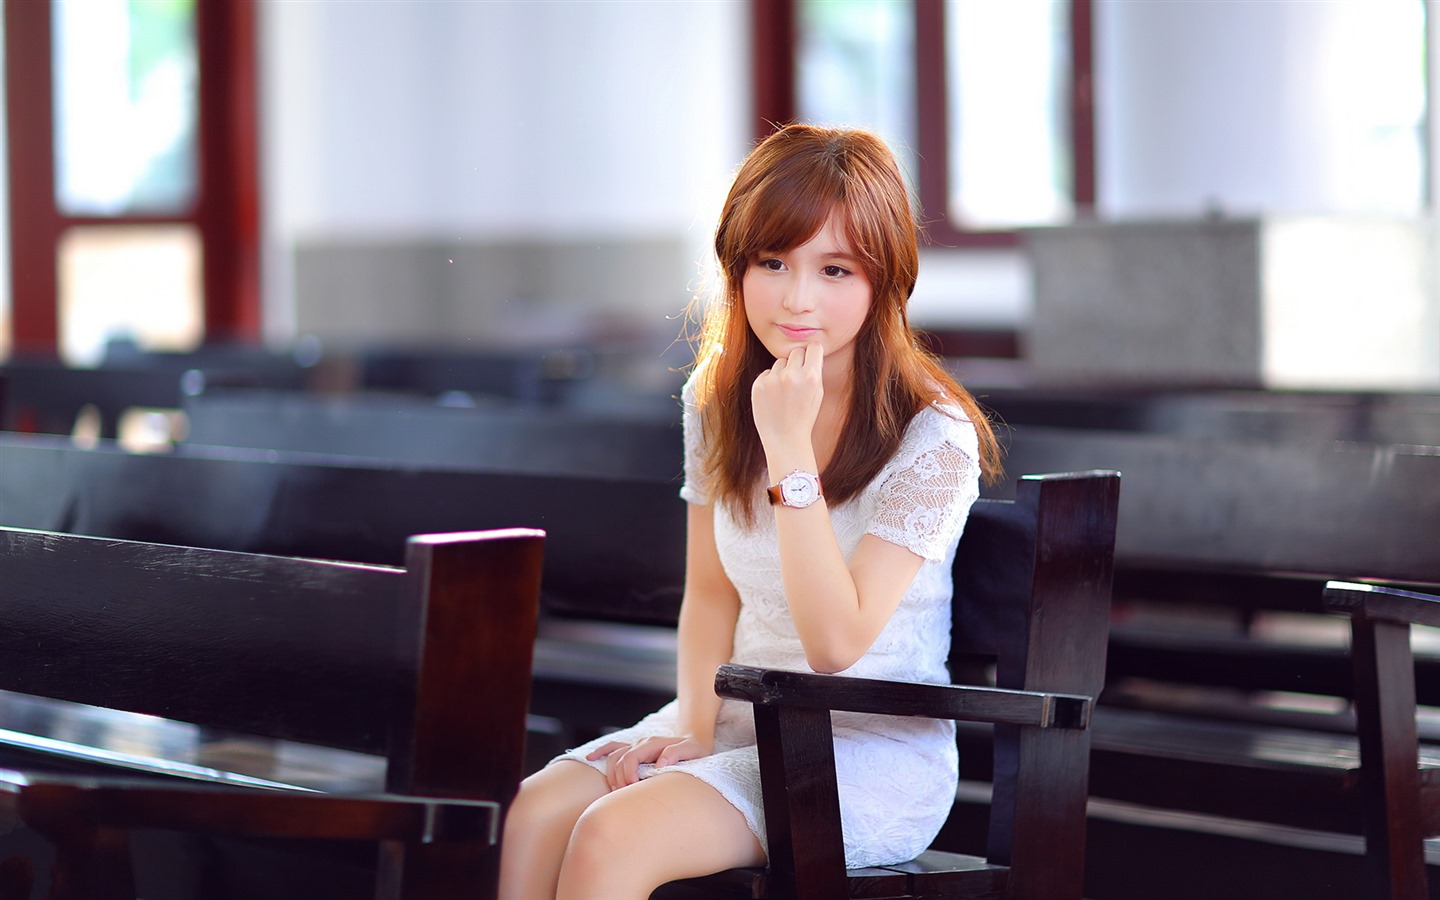 Pure and lovely young Asian girl HD wallpapers collection (2) #37 - 1440x900